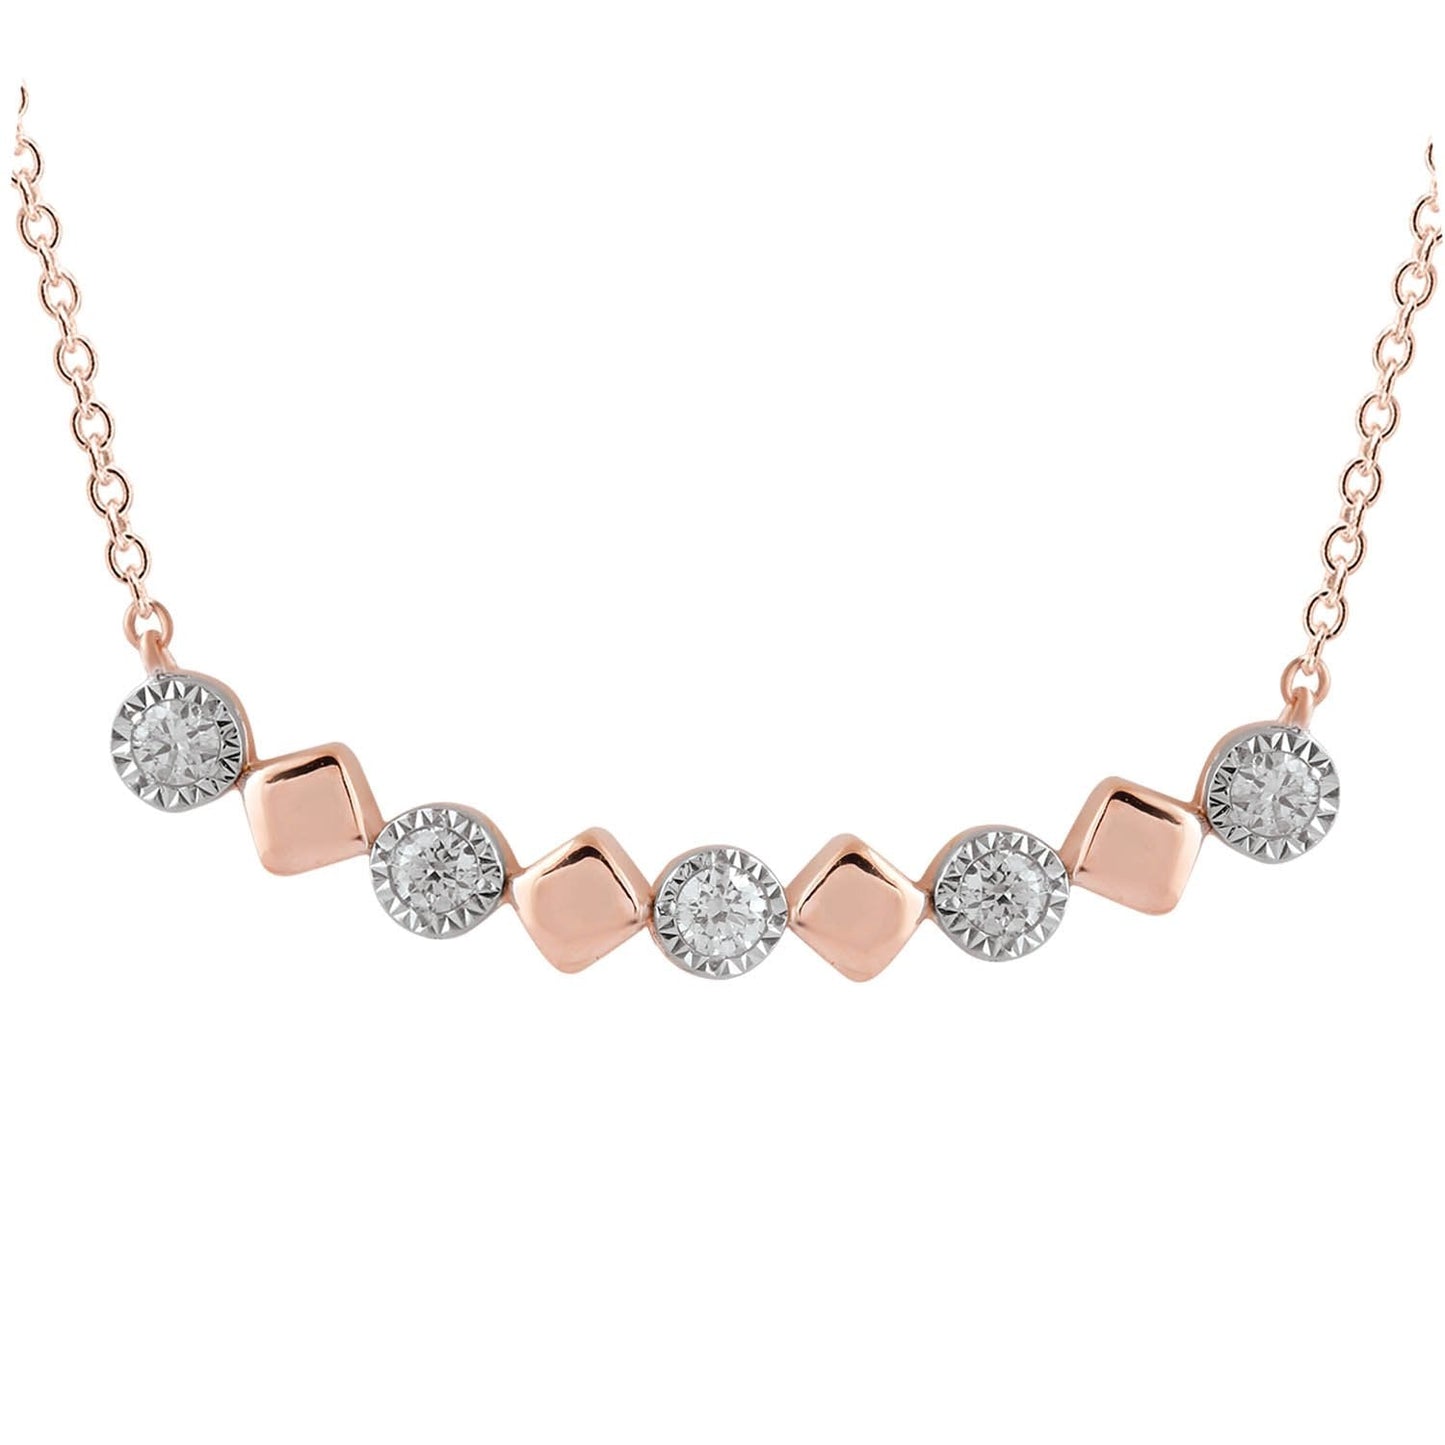 Necklace with 0.15ct Diamonds in 9K Rose Gold